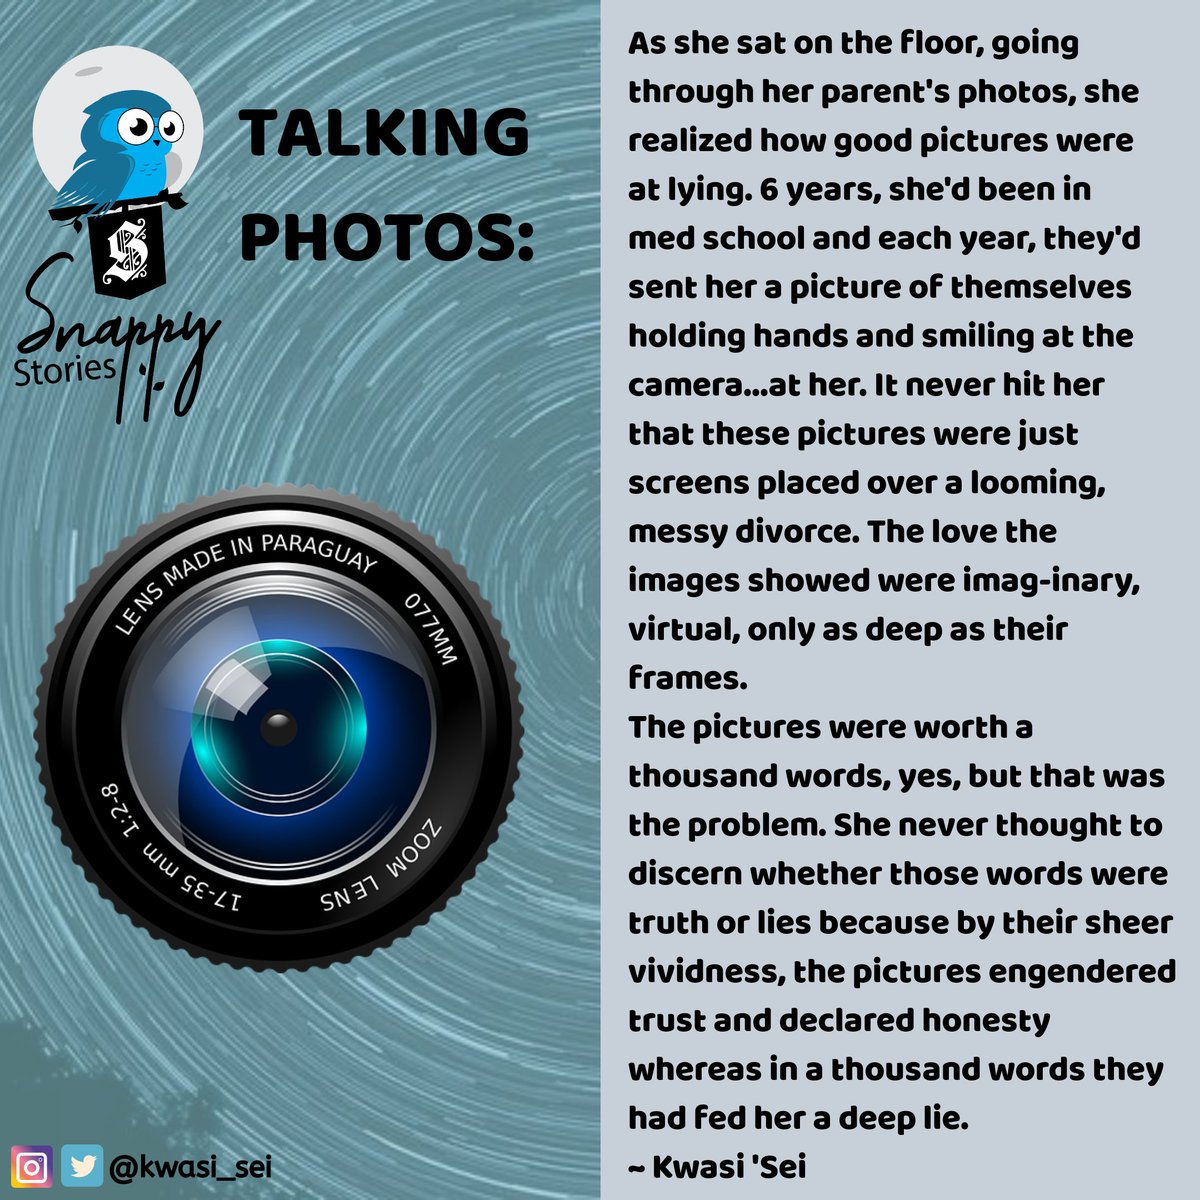 Would you know a lying picture when you see one? #snappystories #microfiction #kwasisei #writerscommunity #writings #writersofinstagram #shortstories #pictureperfect #pictureoftheday #memoriesforlife #shortstories #africanwriters #africanwritersfeature #africanwritersoninstagram